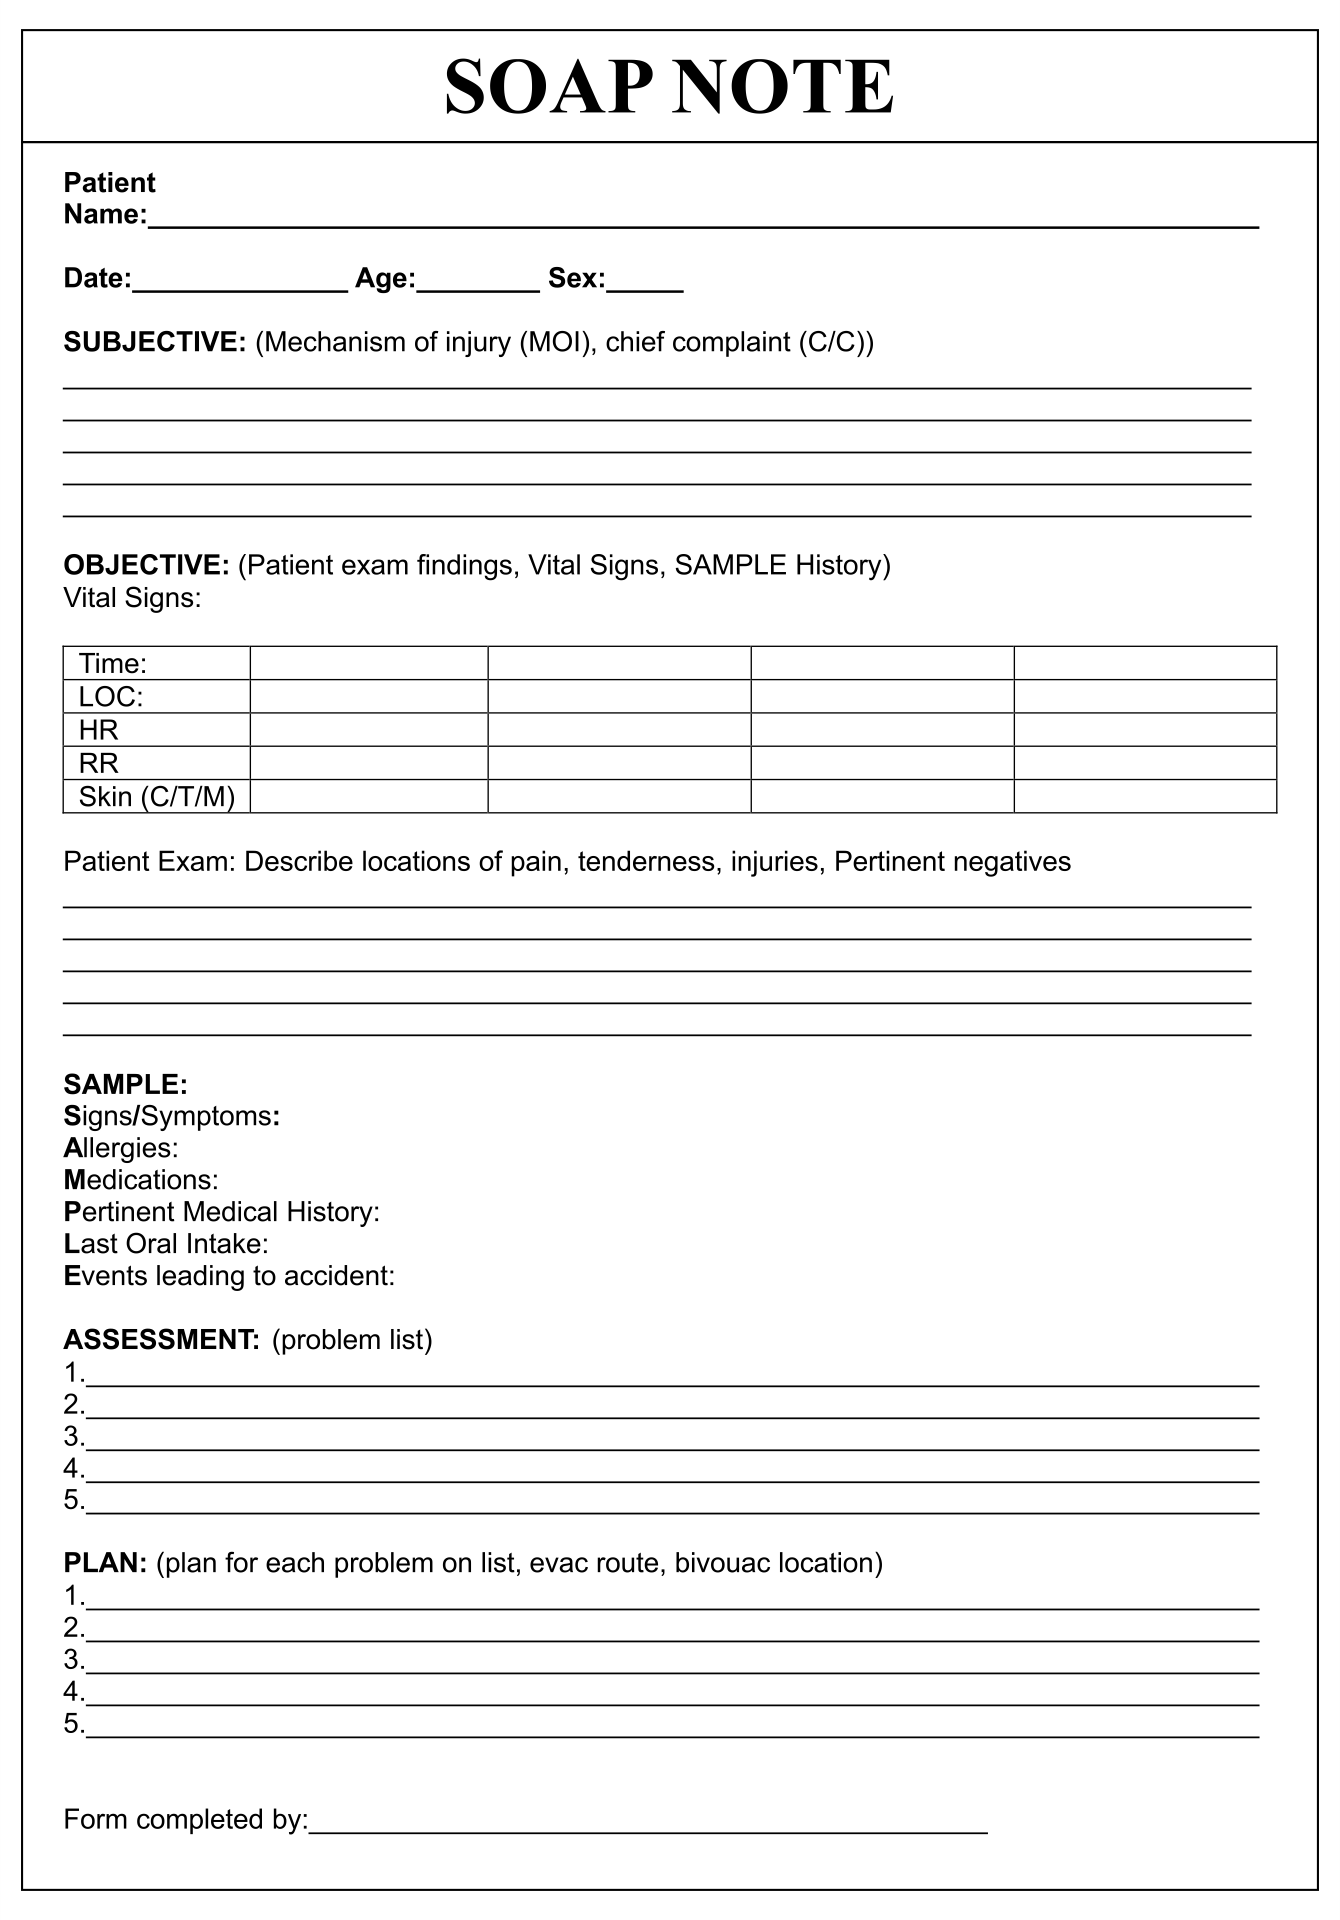 20 Best Printable Counseling Soap Note Templates - printablee.com Within Nursing Home Physician Progress Note Template